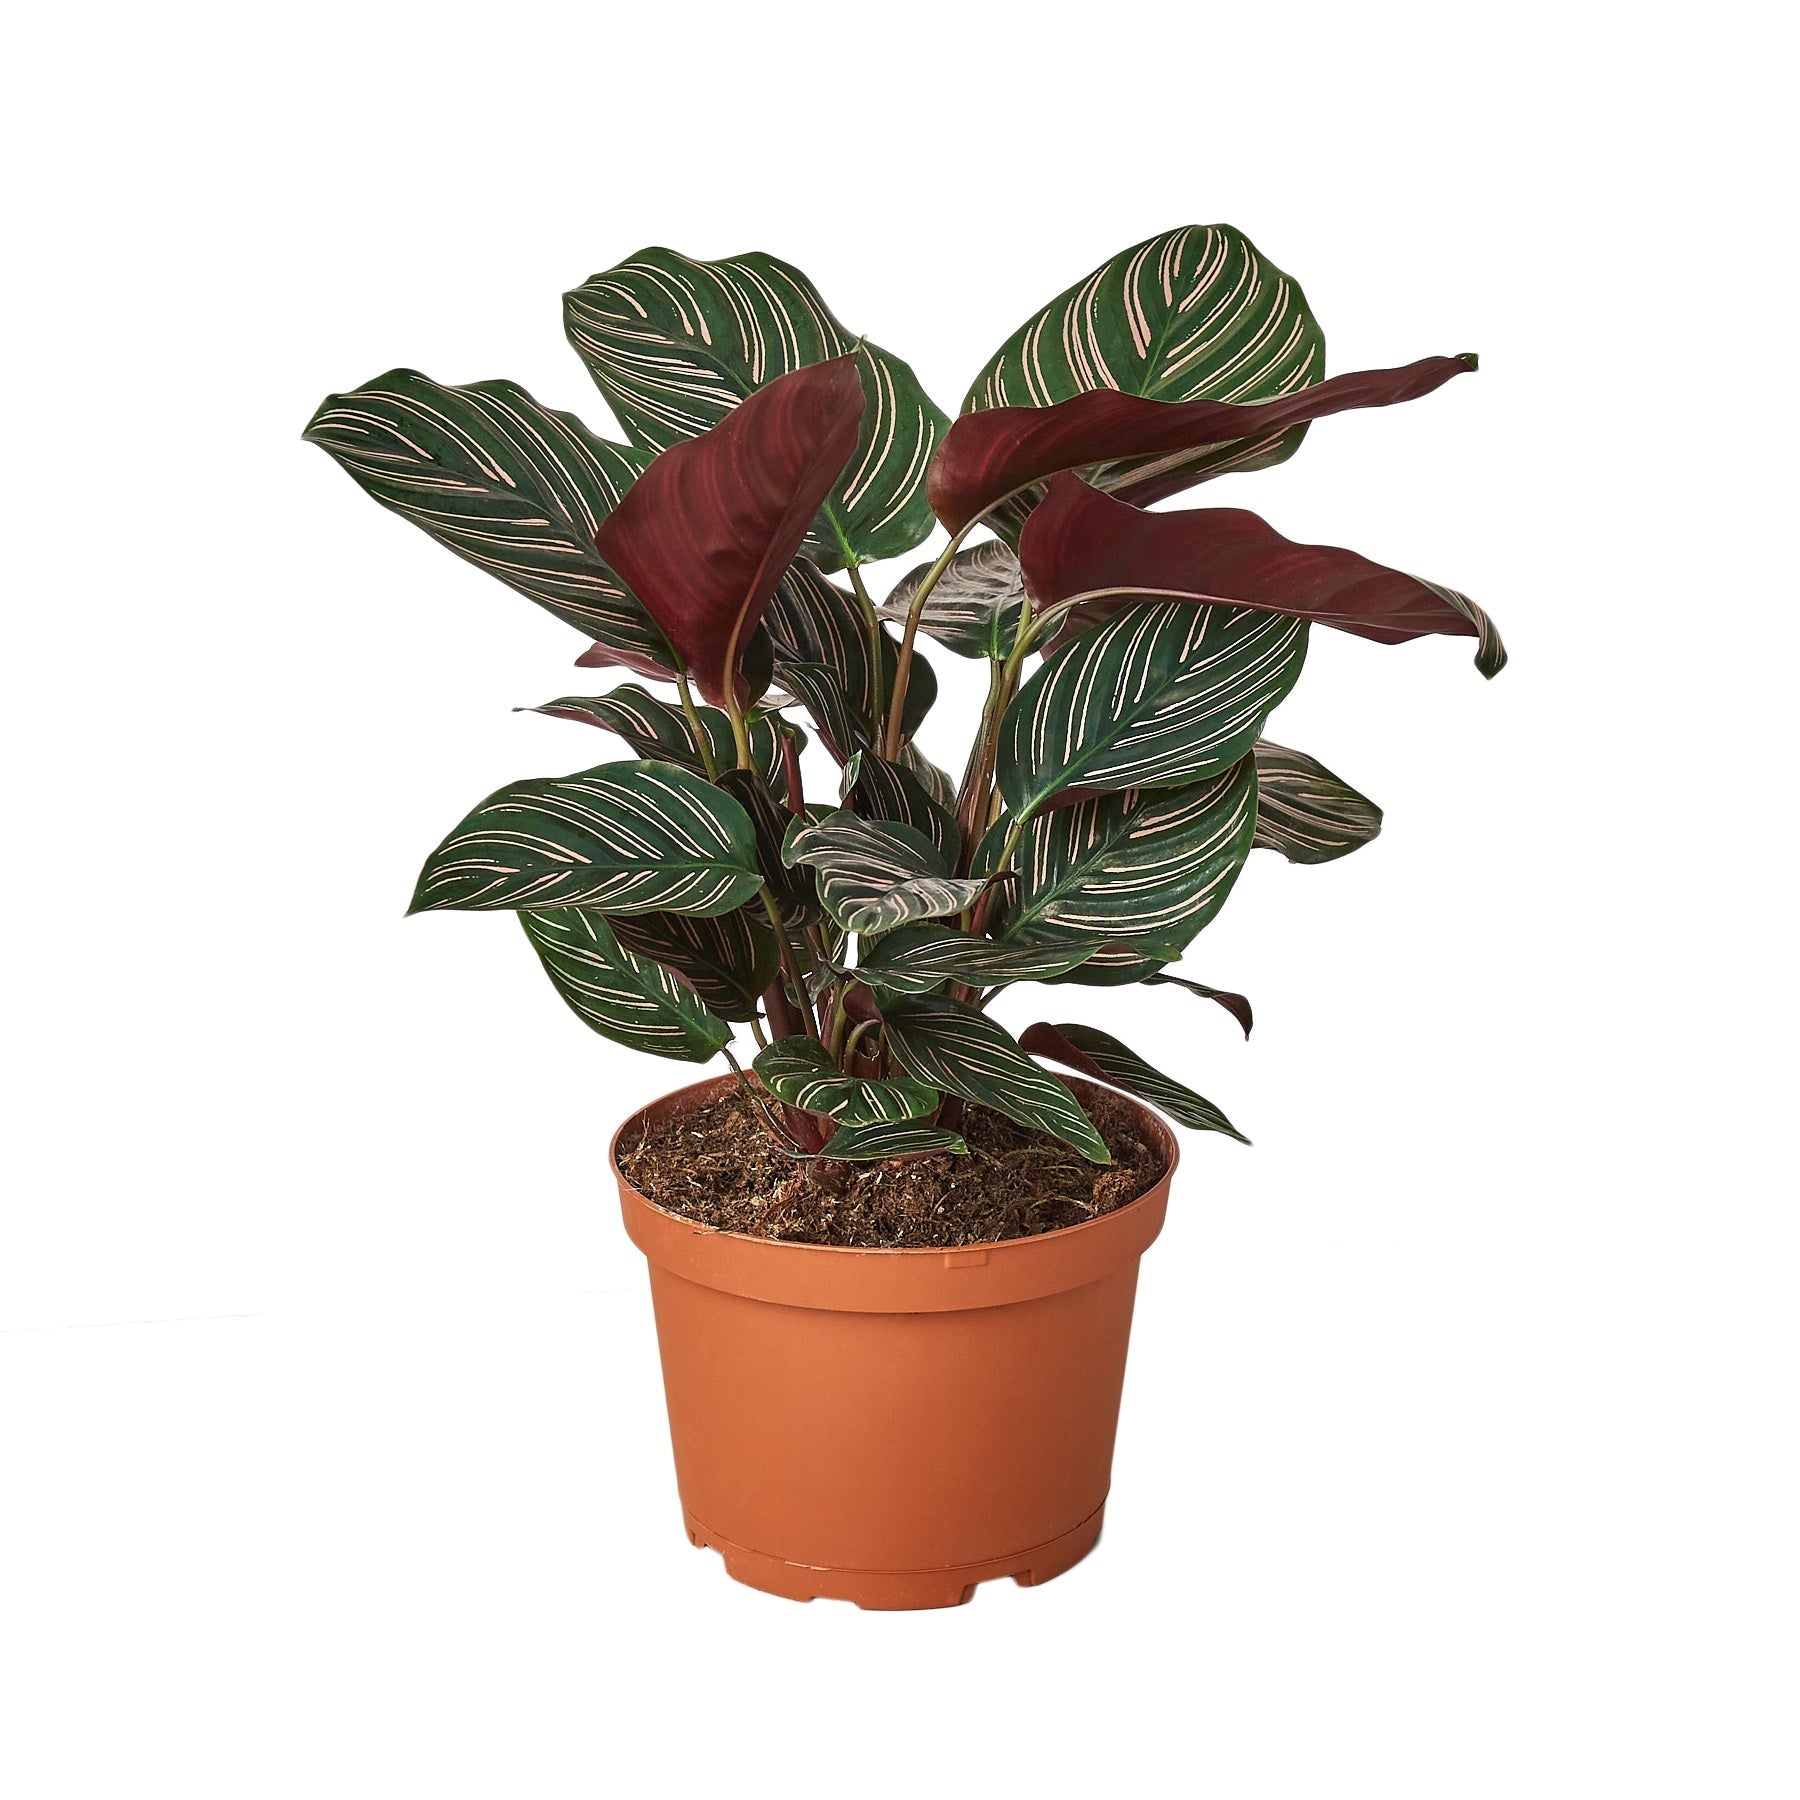 A vibrant plant with red leaves in a pot, showcased on a clean white background.